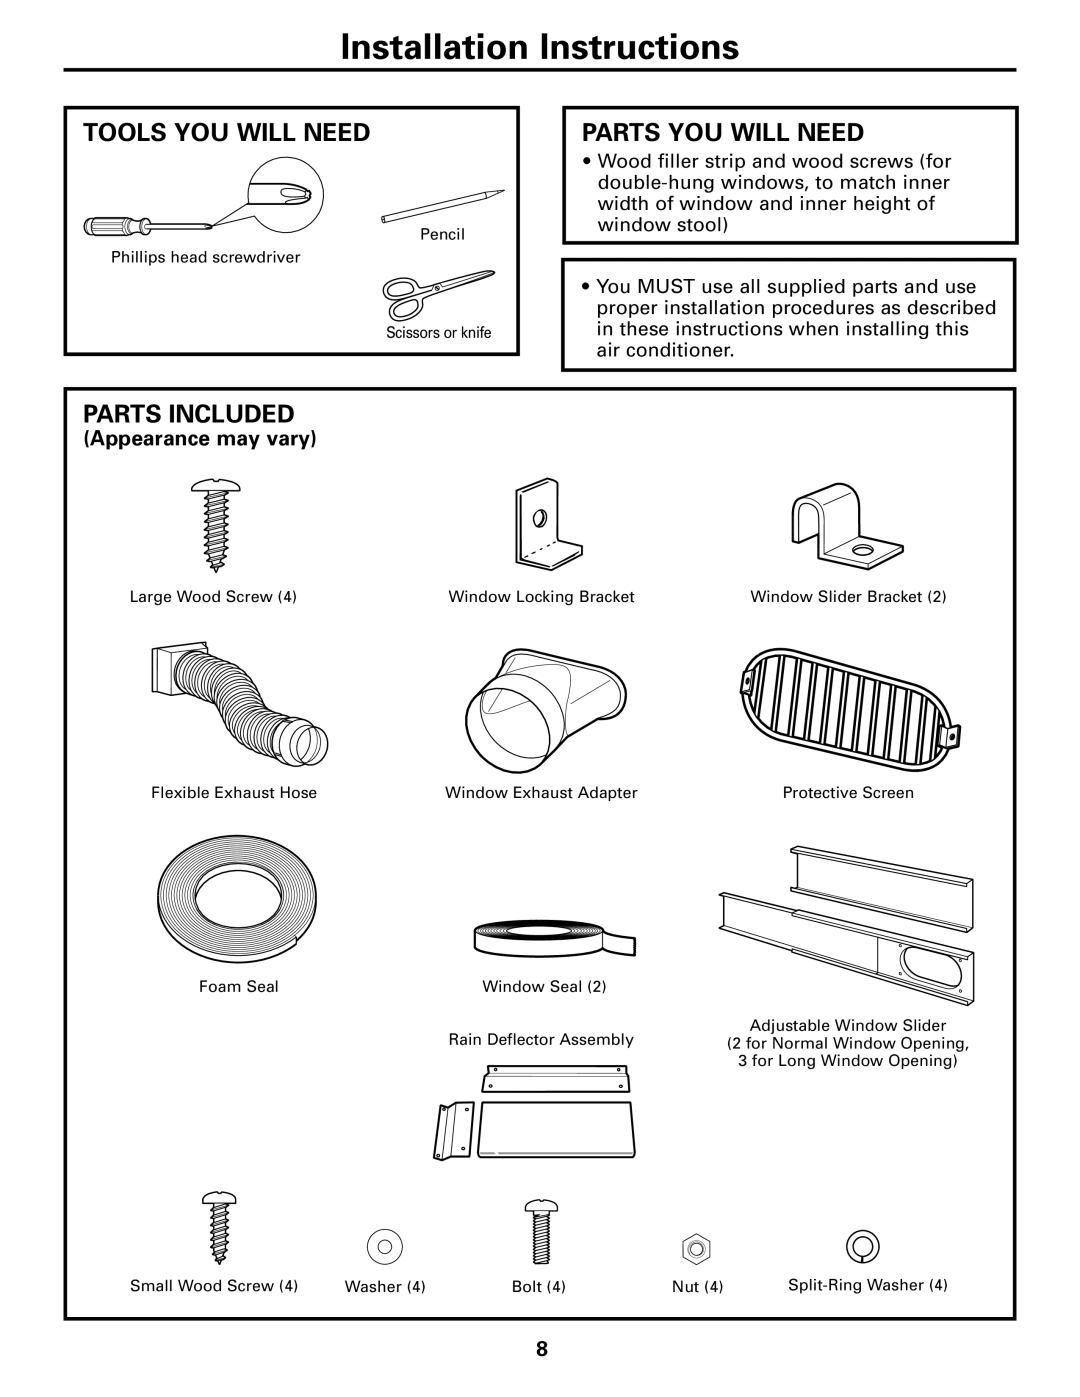 GE APE08 Installation Instructions, Tools You Will Need, Parts You Will Need, Parts Included, Appearance may vary 